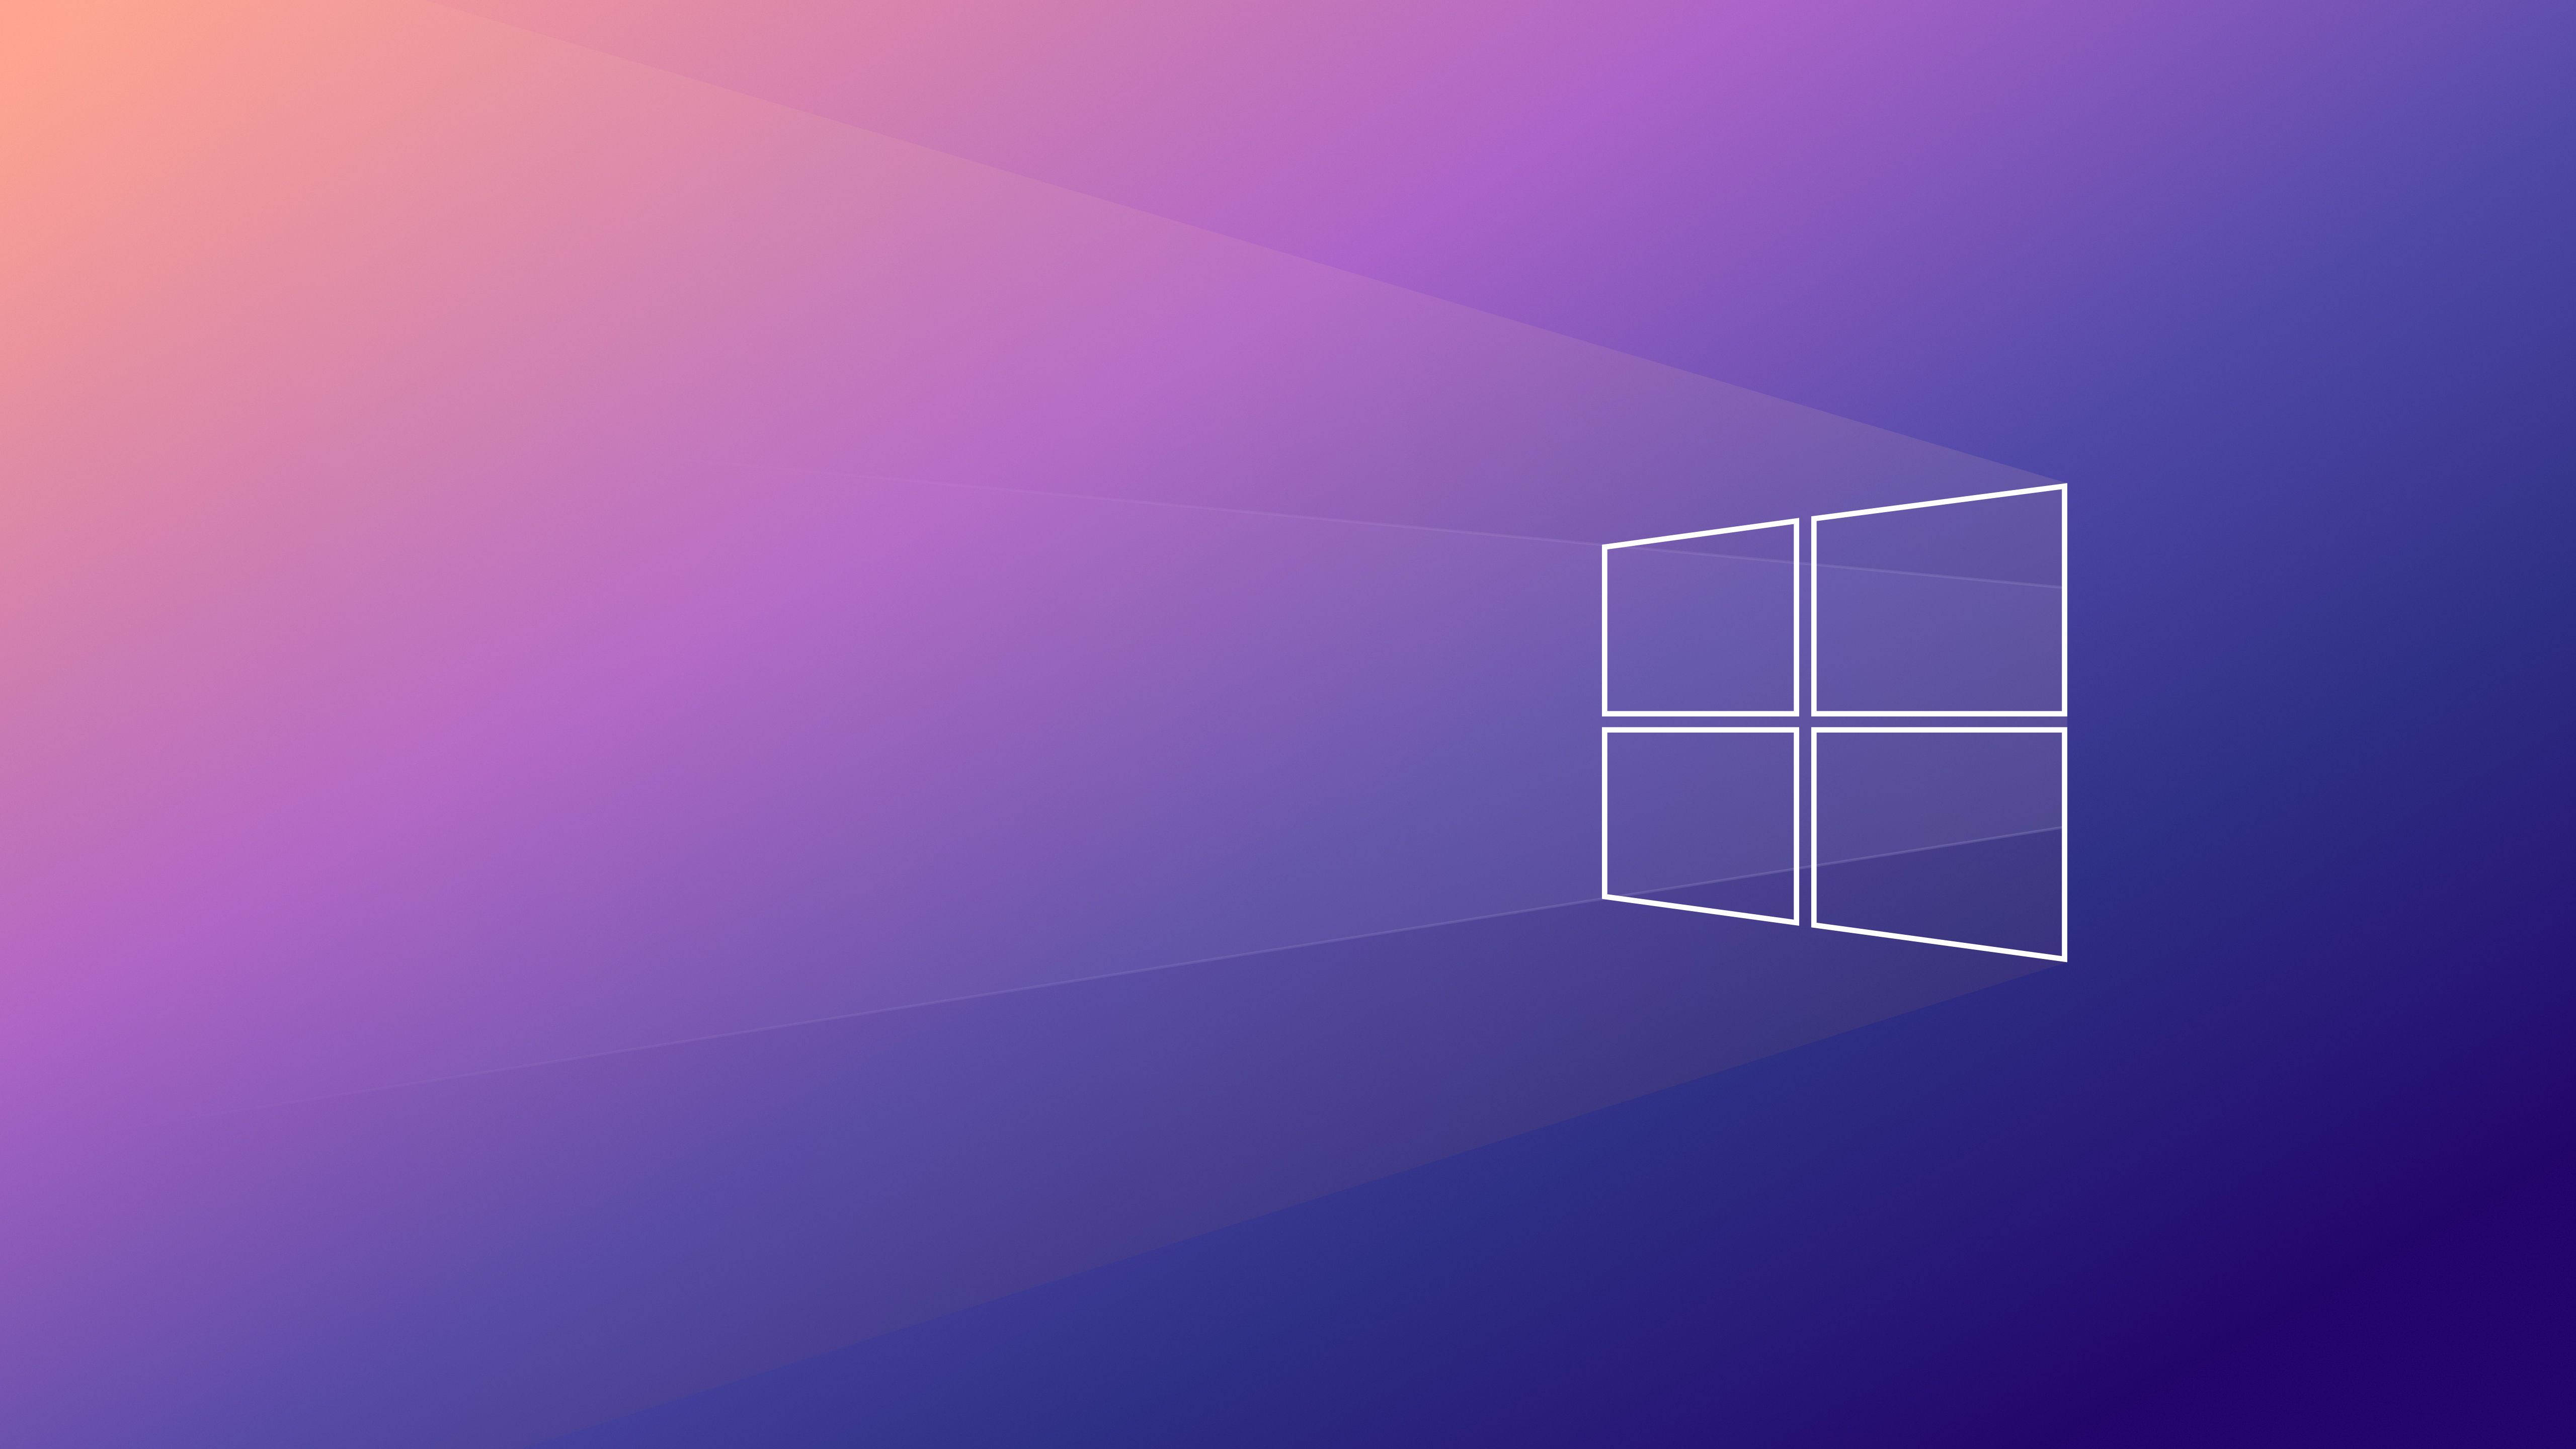 Windows Minimal Back To Basics 5k, HD Computer, 4k Wallpapers, Image, Backgrounds, Photos and Pictures